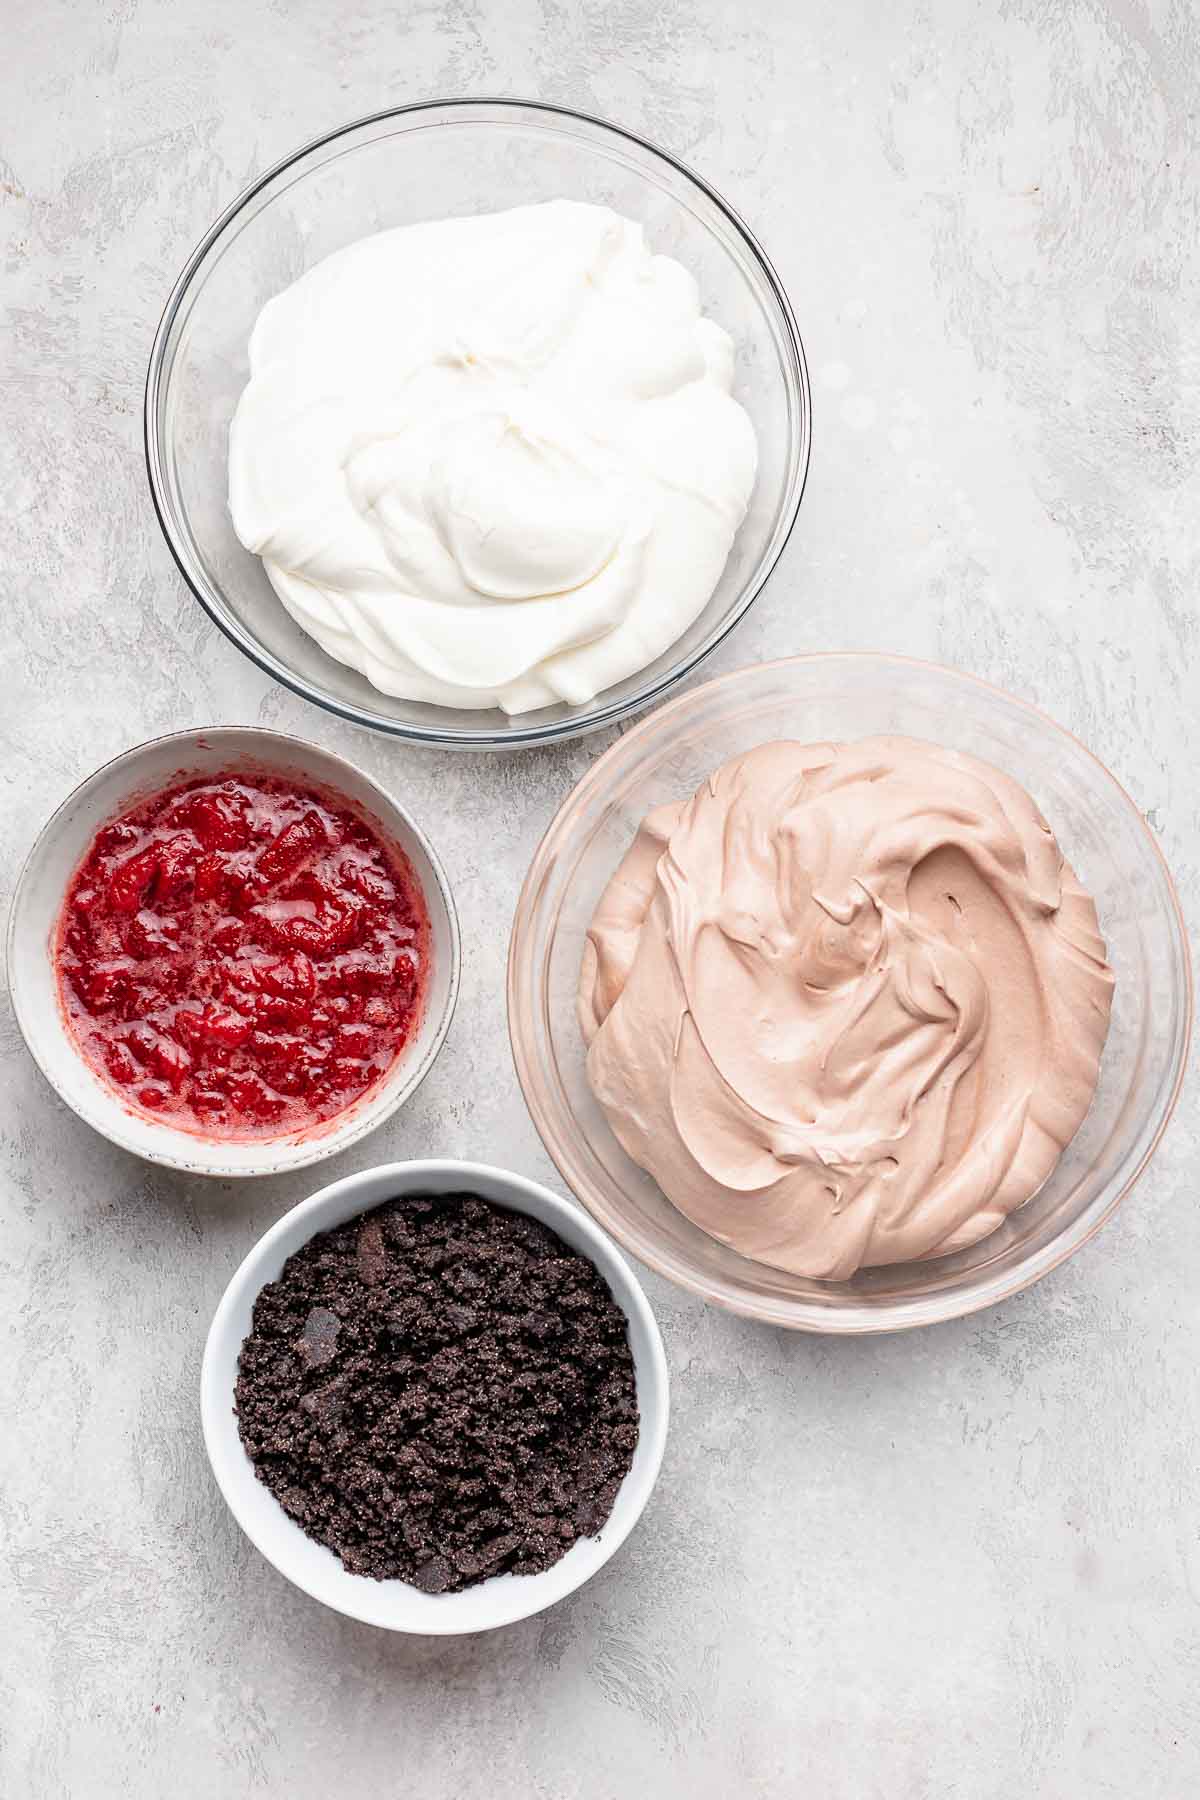 Ingredients in prep bowls for Ice Cream Cake